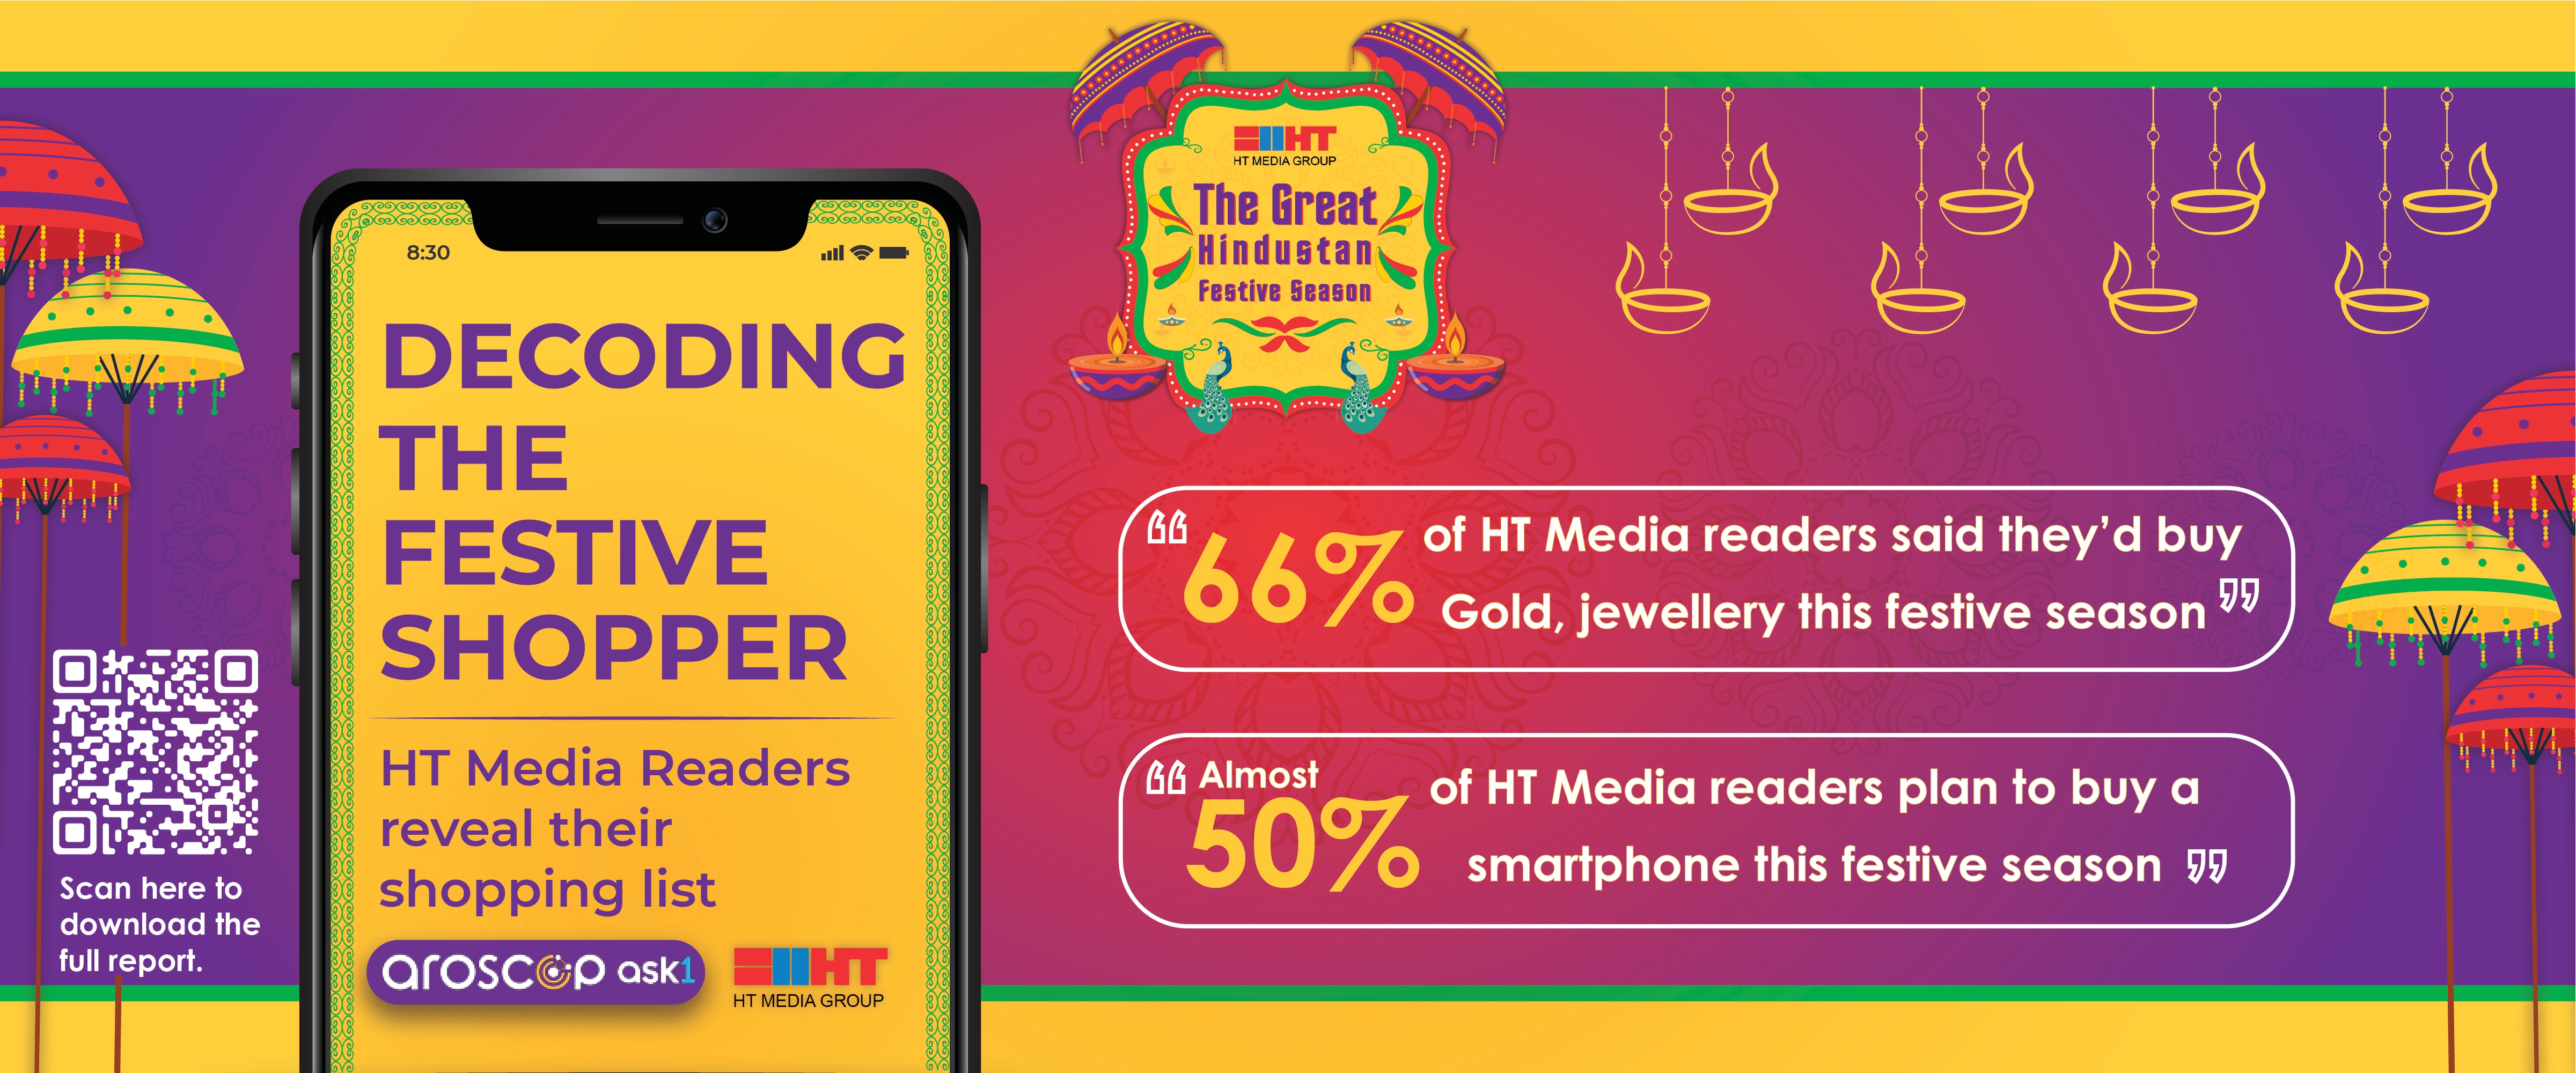 50 per cent of HT Media readers are planning to buy a smartphone this festive season.